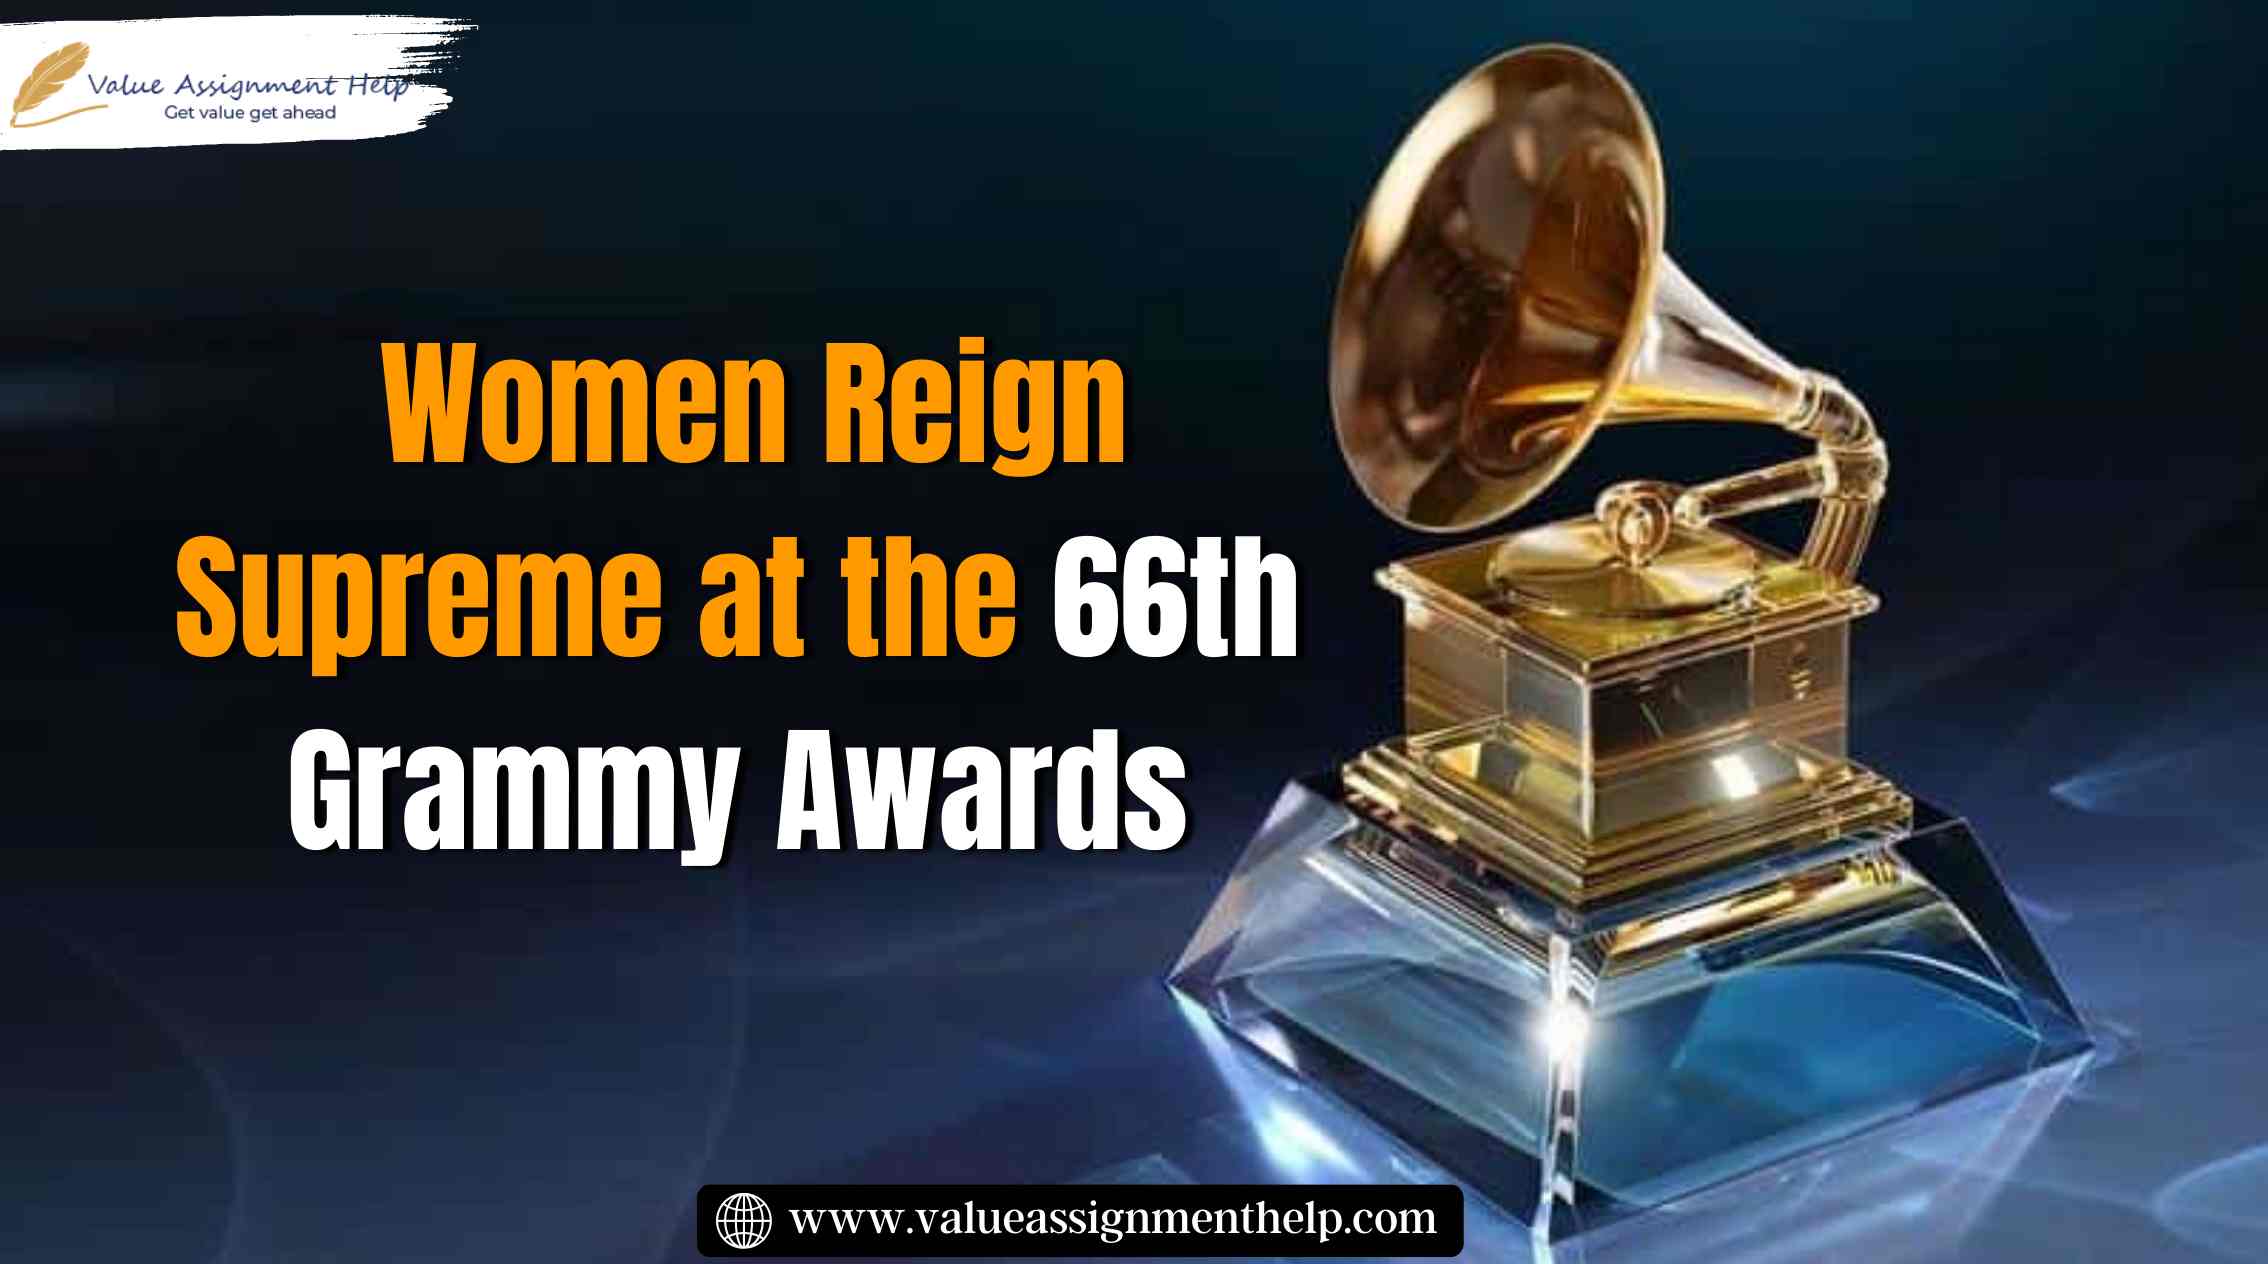  Women Reign Supreme at the 66th Grammy Awards